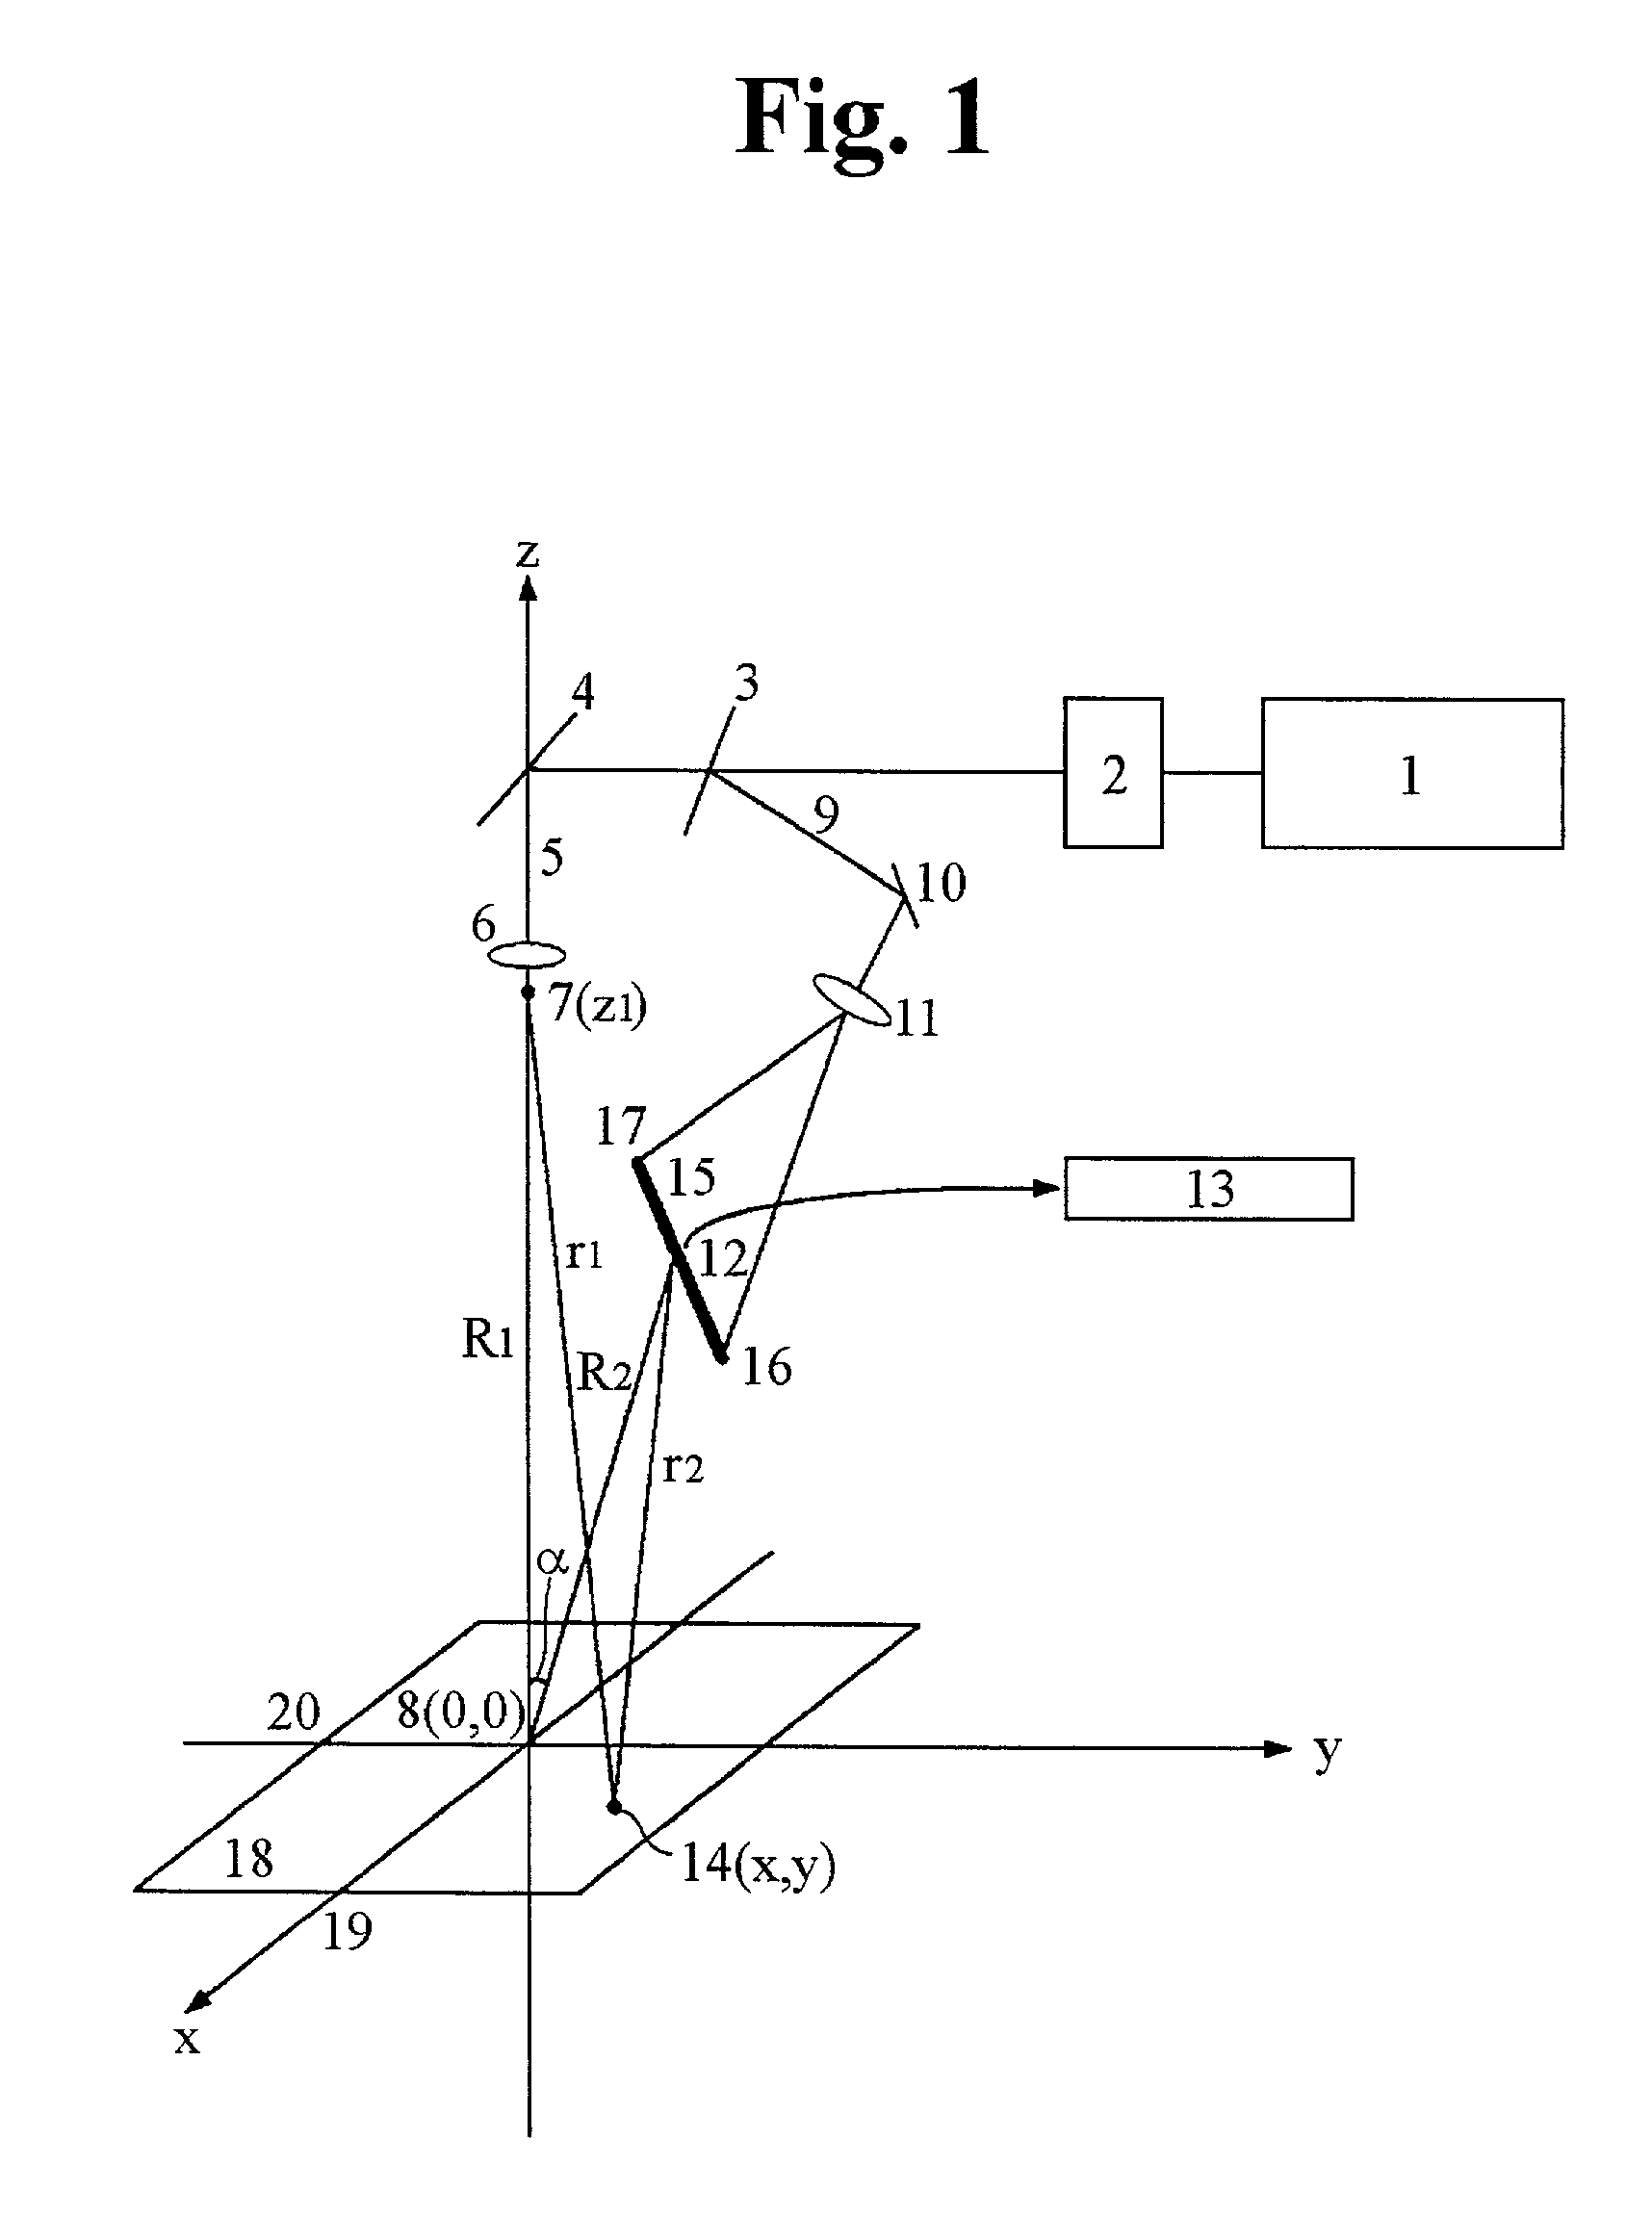 Holographic projection screen for displaying a three-dimensional color images and optical display system using the holographic screen